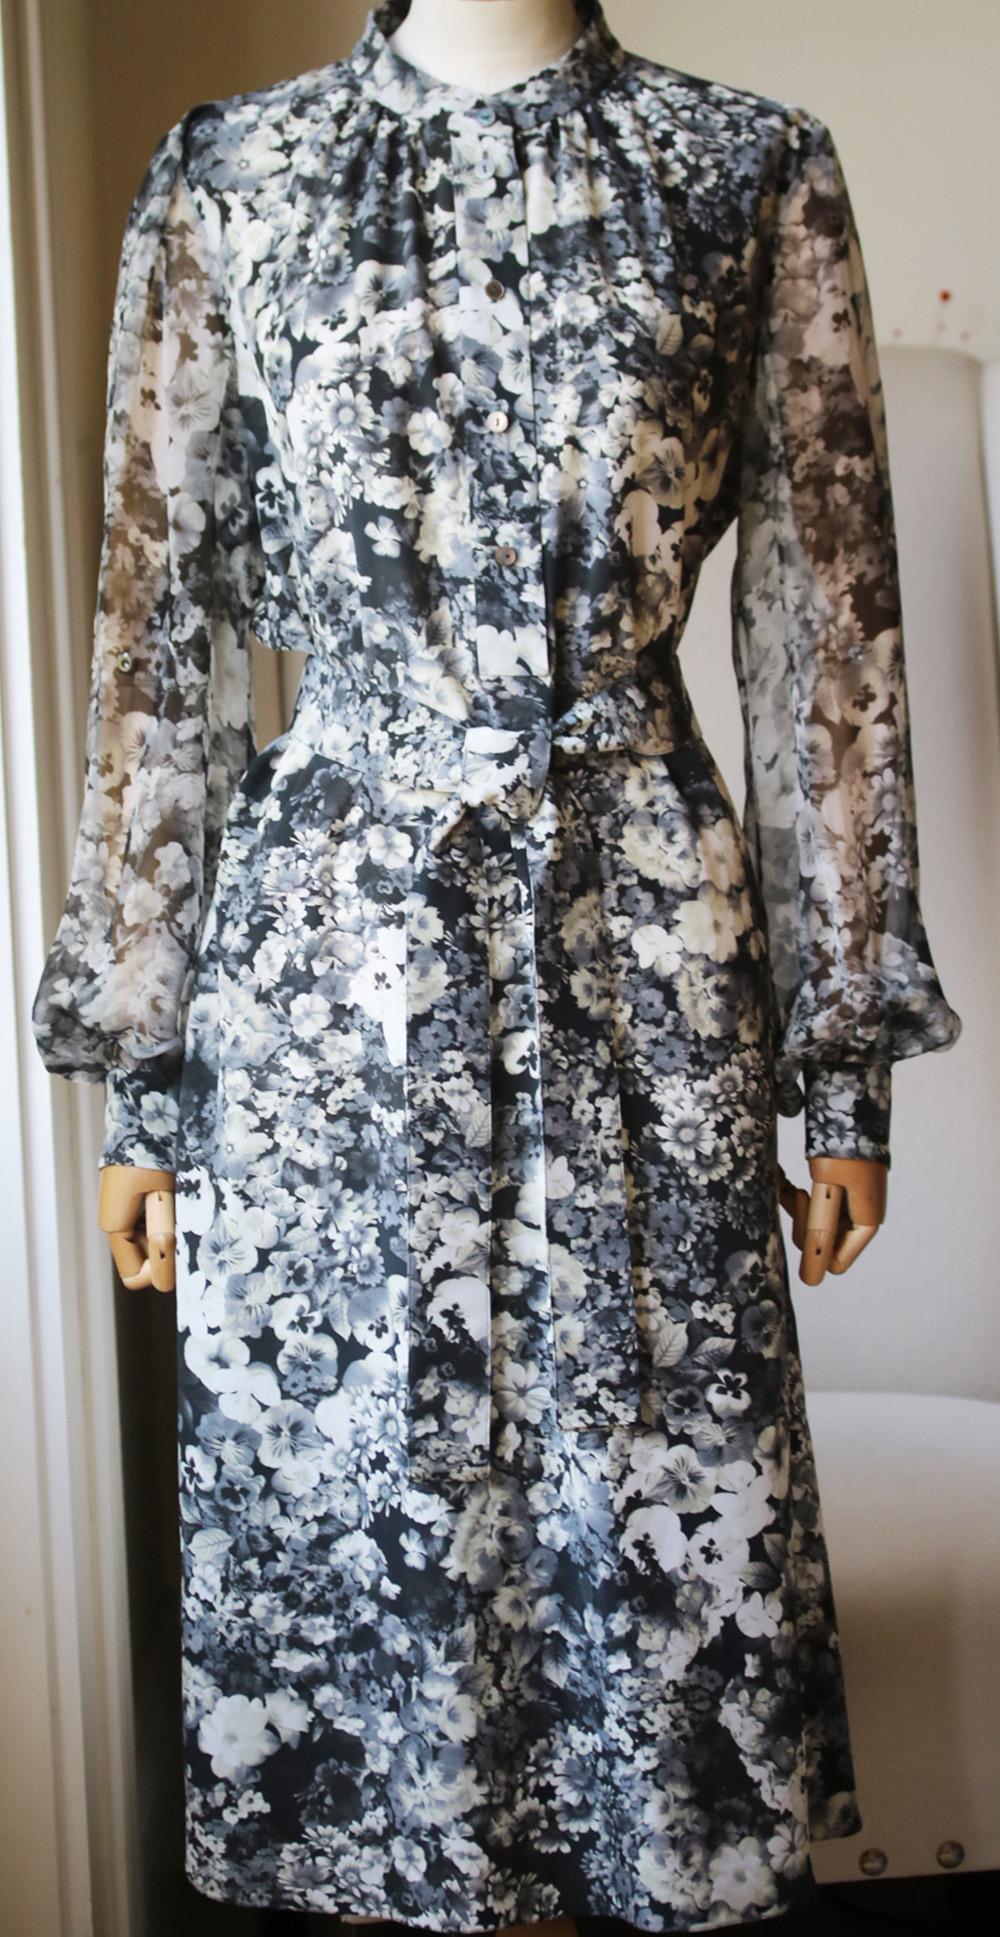 Grey and white silk flared floral print dress from Lanvin. Featuring a band collar, a front button placket, bell sleeves, button cuffs, a tie waist. Flared skirt and a back inverted pleat. Grey and black silk-chiffon. Button fastening. 100% Silk.